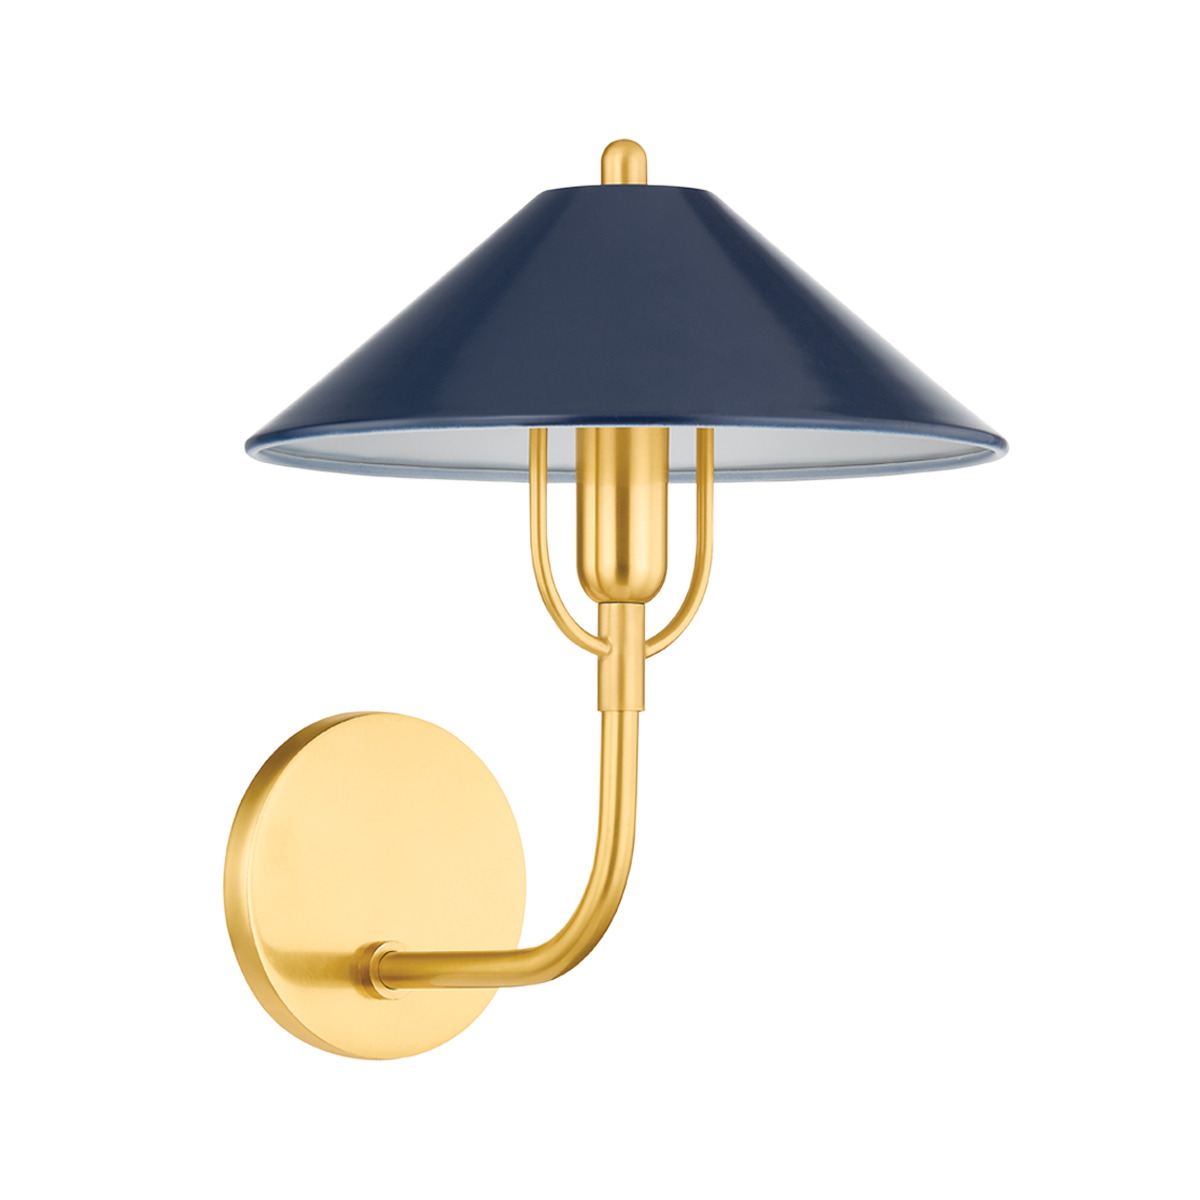 Mariel Wall Sconce Wall Sconce Aged Brass/Soft Navy 